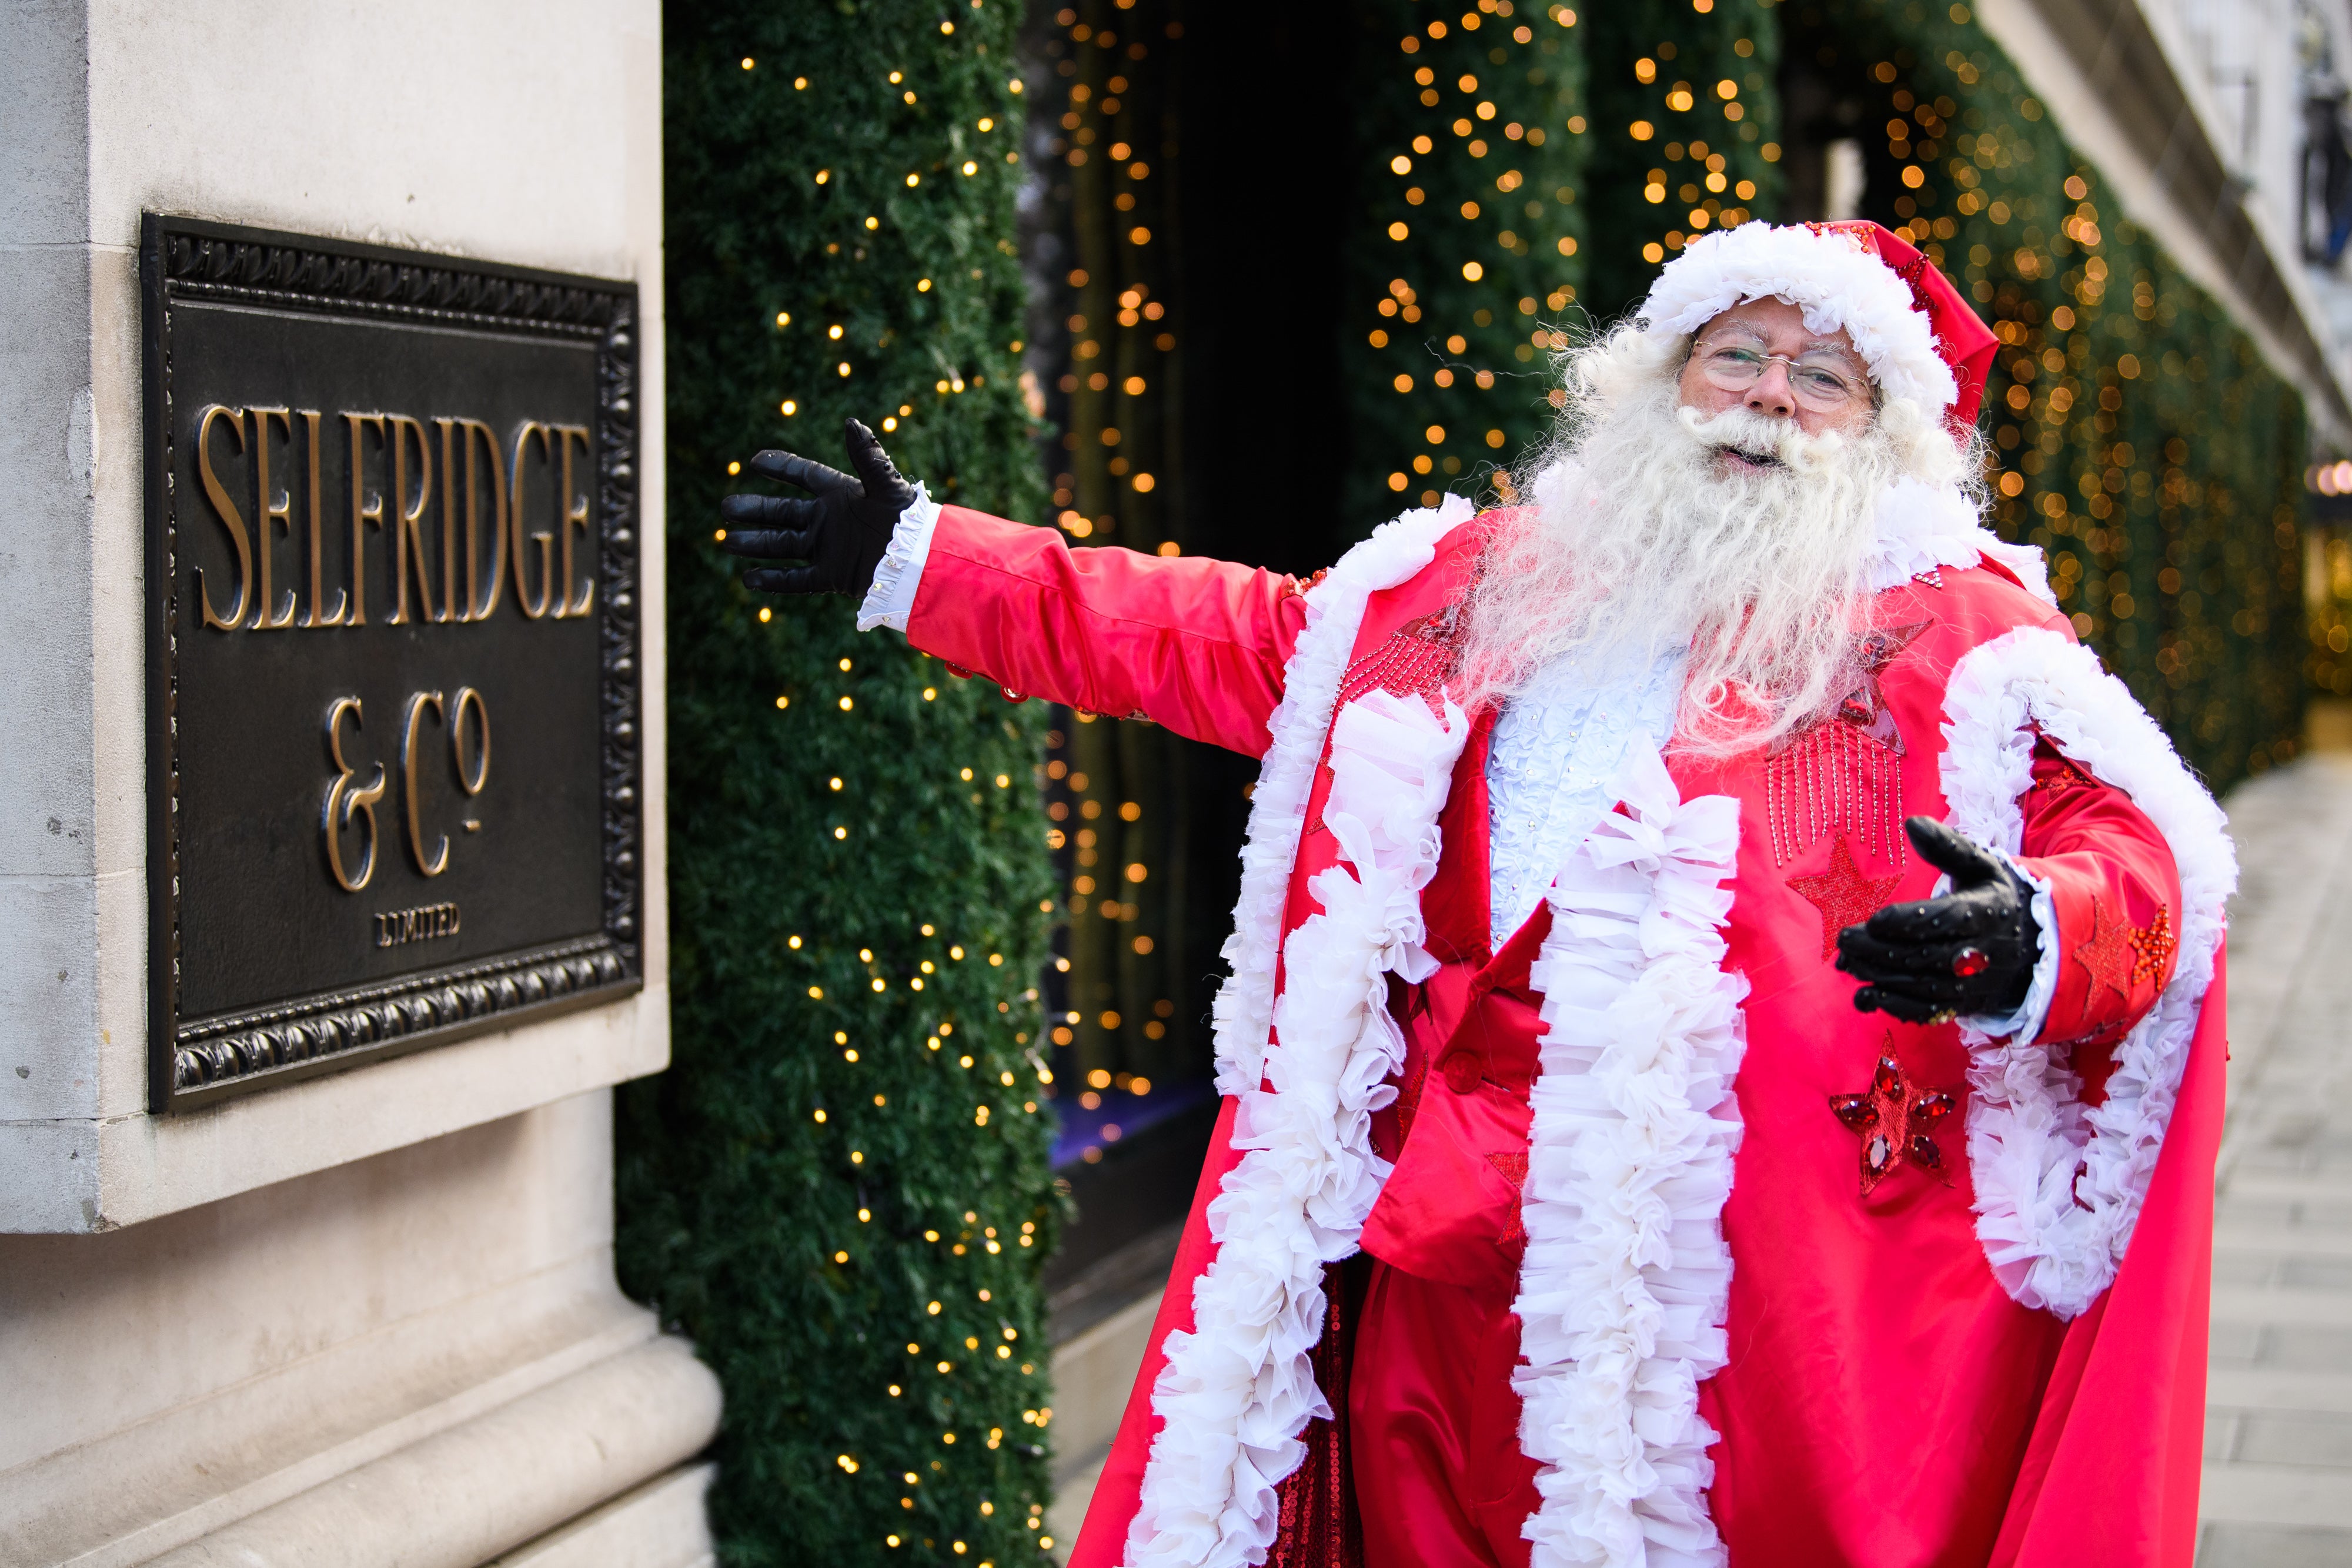 Santa won’t be visiting every day – so how do landmark department stores keep attracting customers?